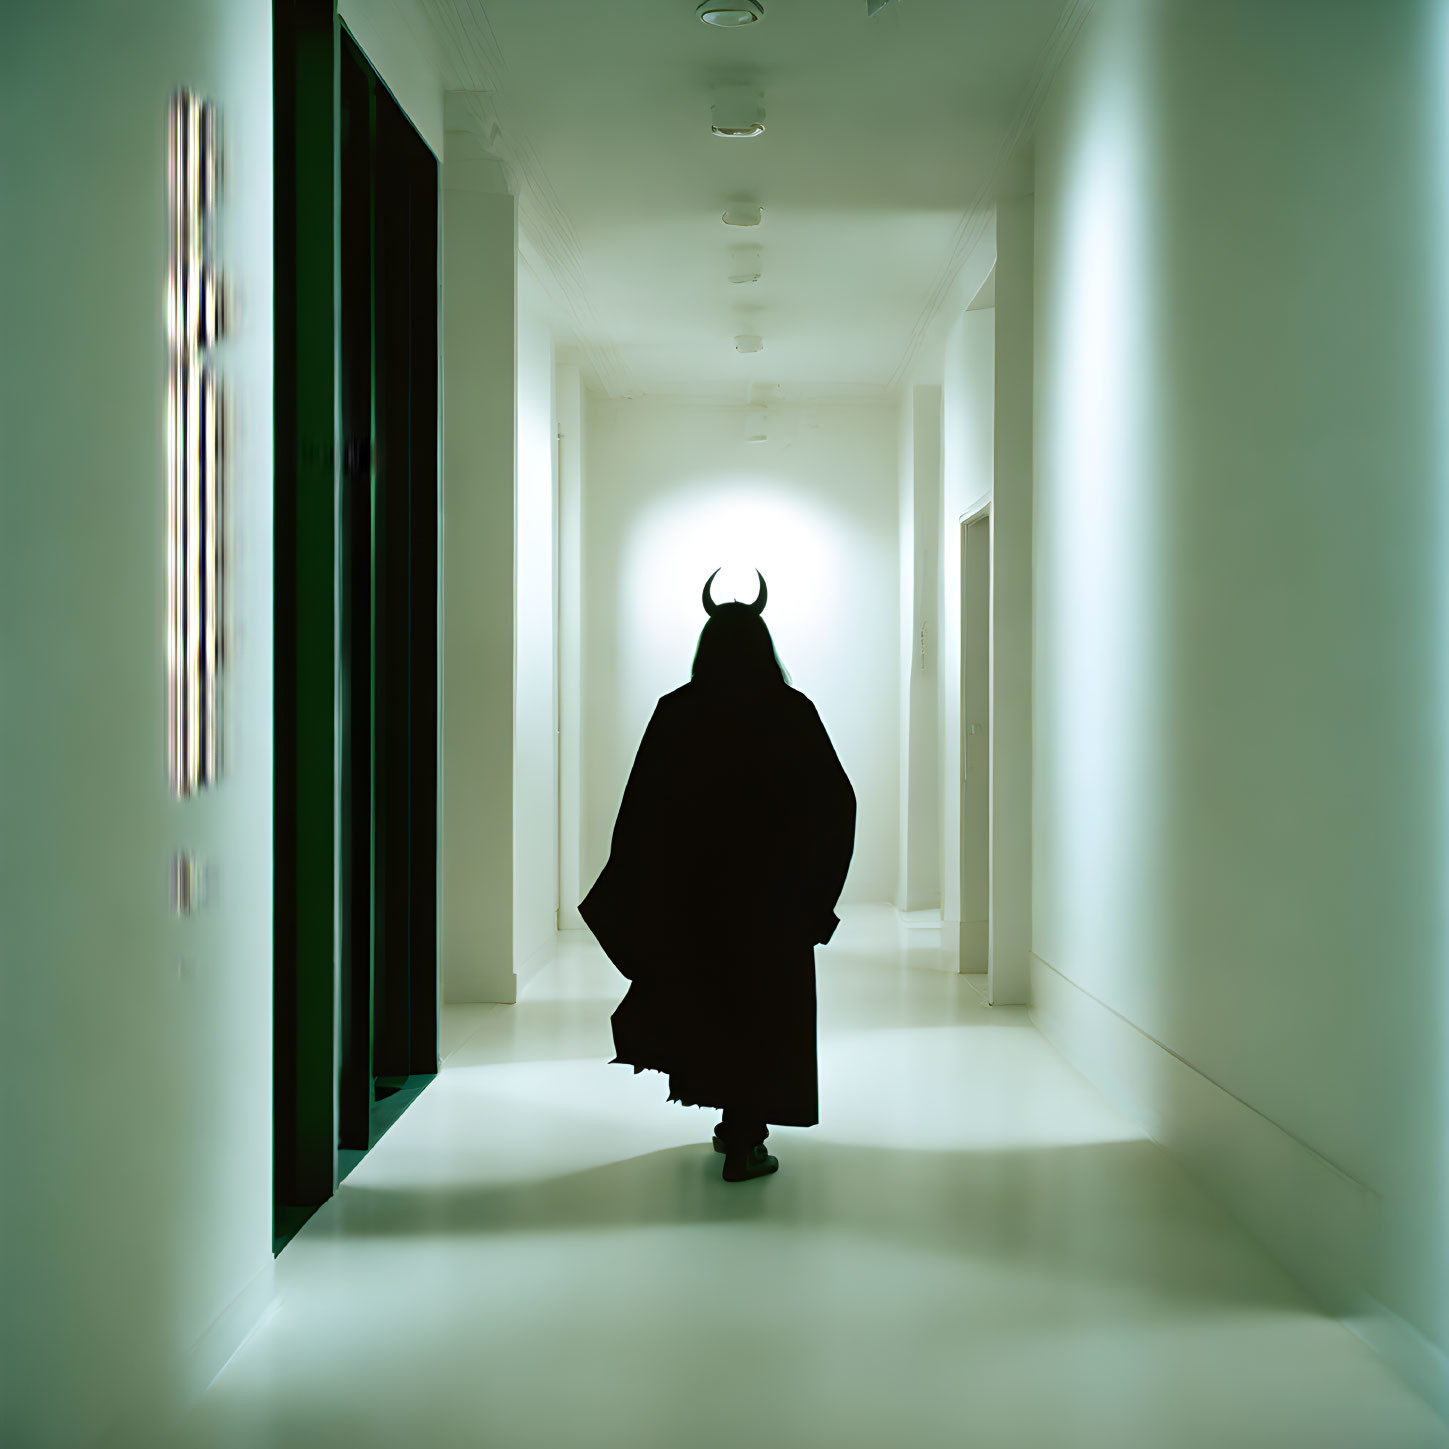 Dark cloaked figure with horns in modern hallway contrast light and shadow